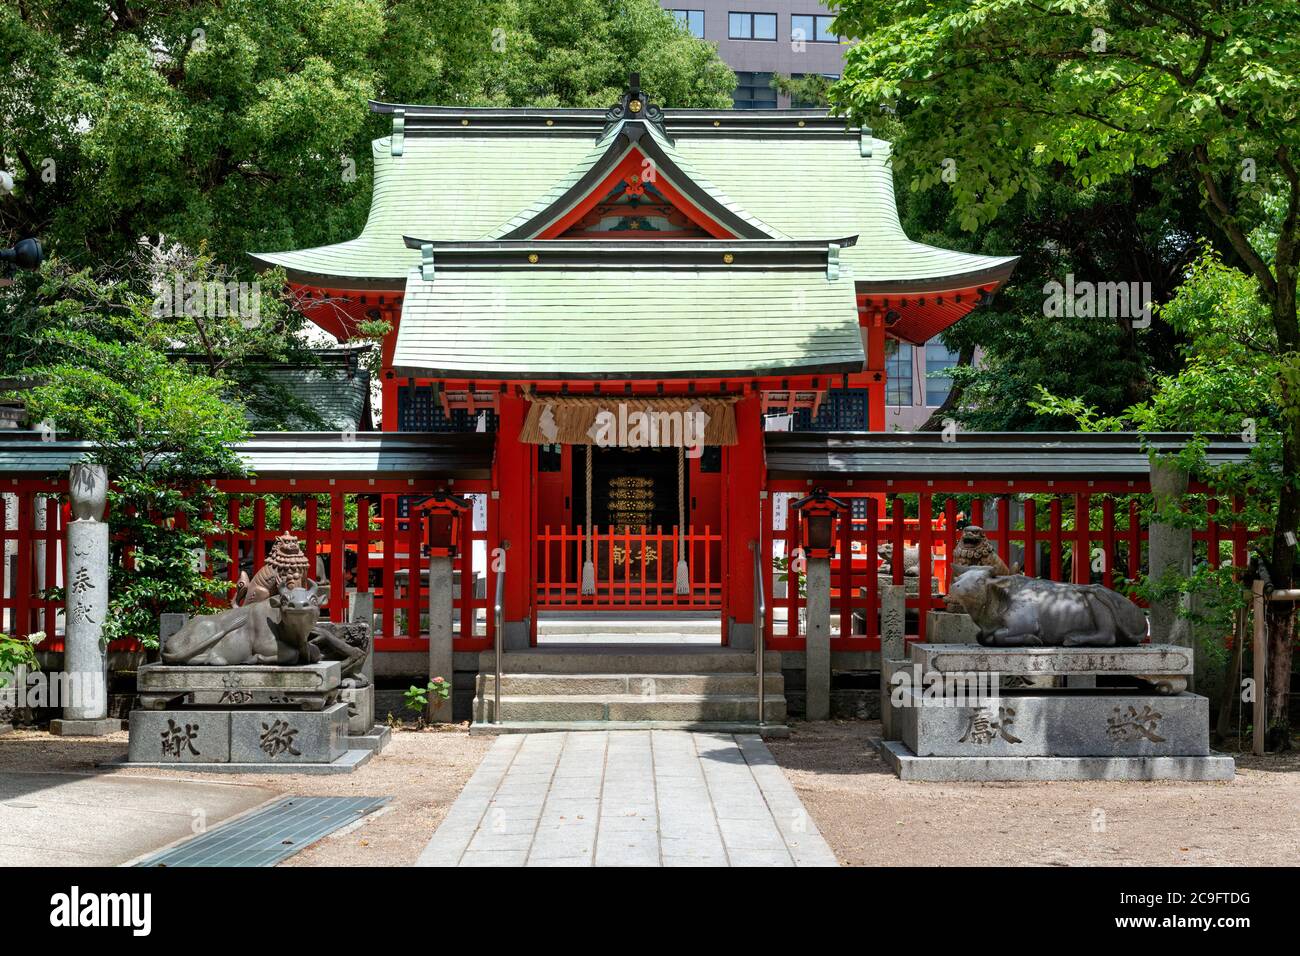 Fukuoka, Japan, May 28 2019, entrance in the famous ancient Suikyo Tenmangu Shrine. This shrine with its garden is a quiet and peaceful hidden place i Stock Photo